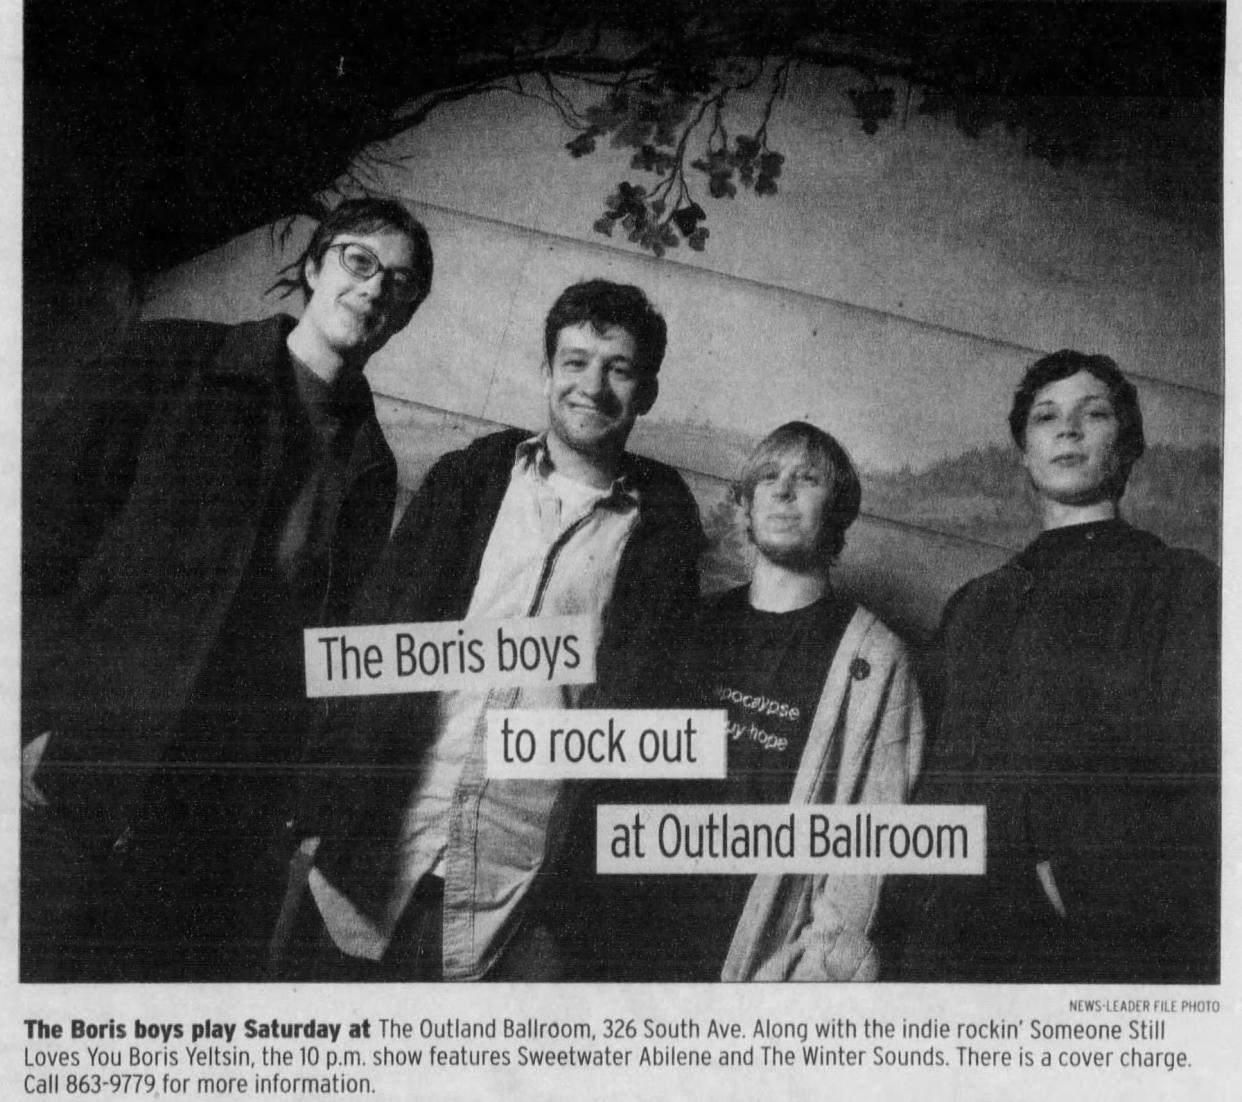 A newspaper clipping about Springfield band Someone Still Loves You Boris Yeltsin playing at The Outland Ballroom from the News-Leader on July 20, 2007.